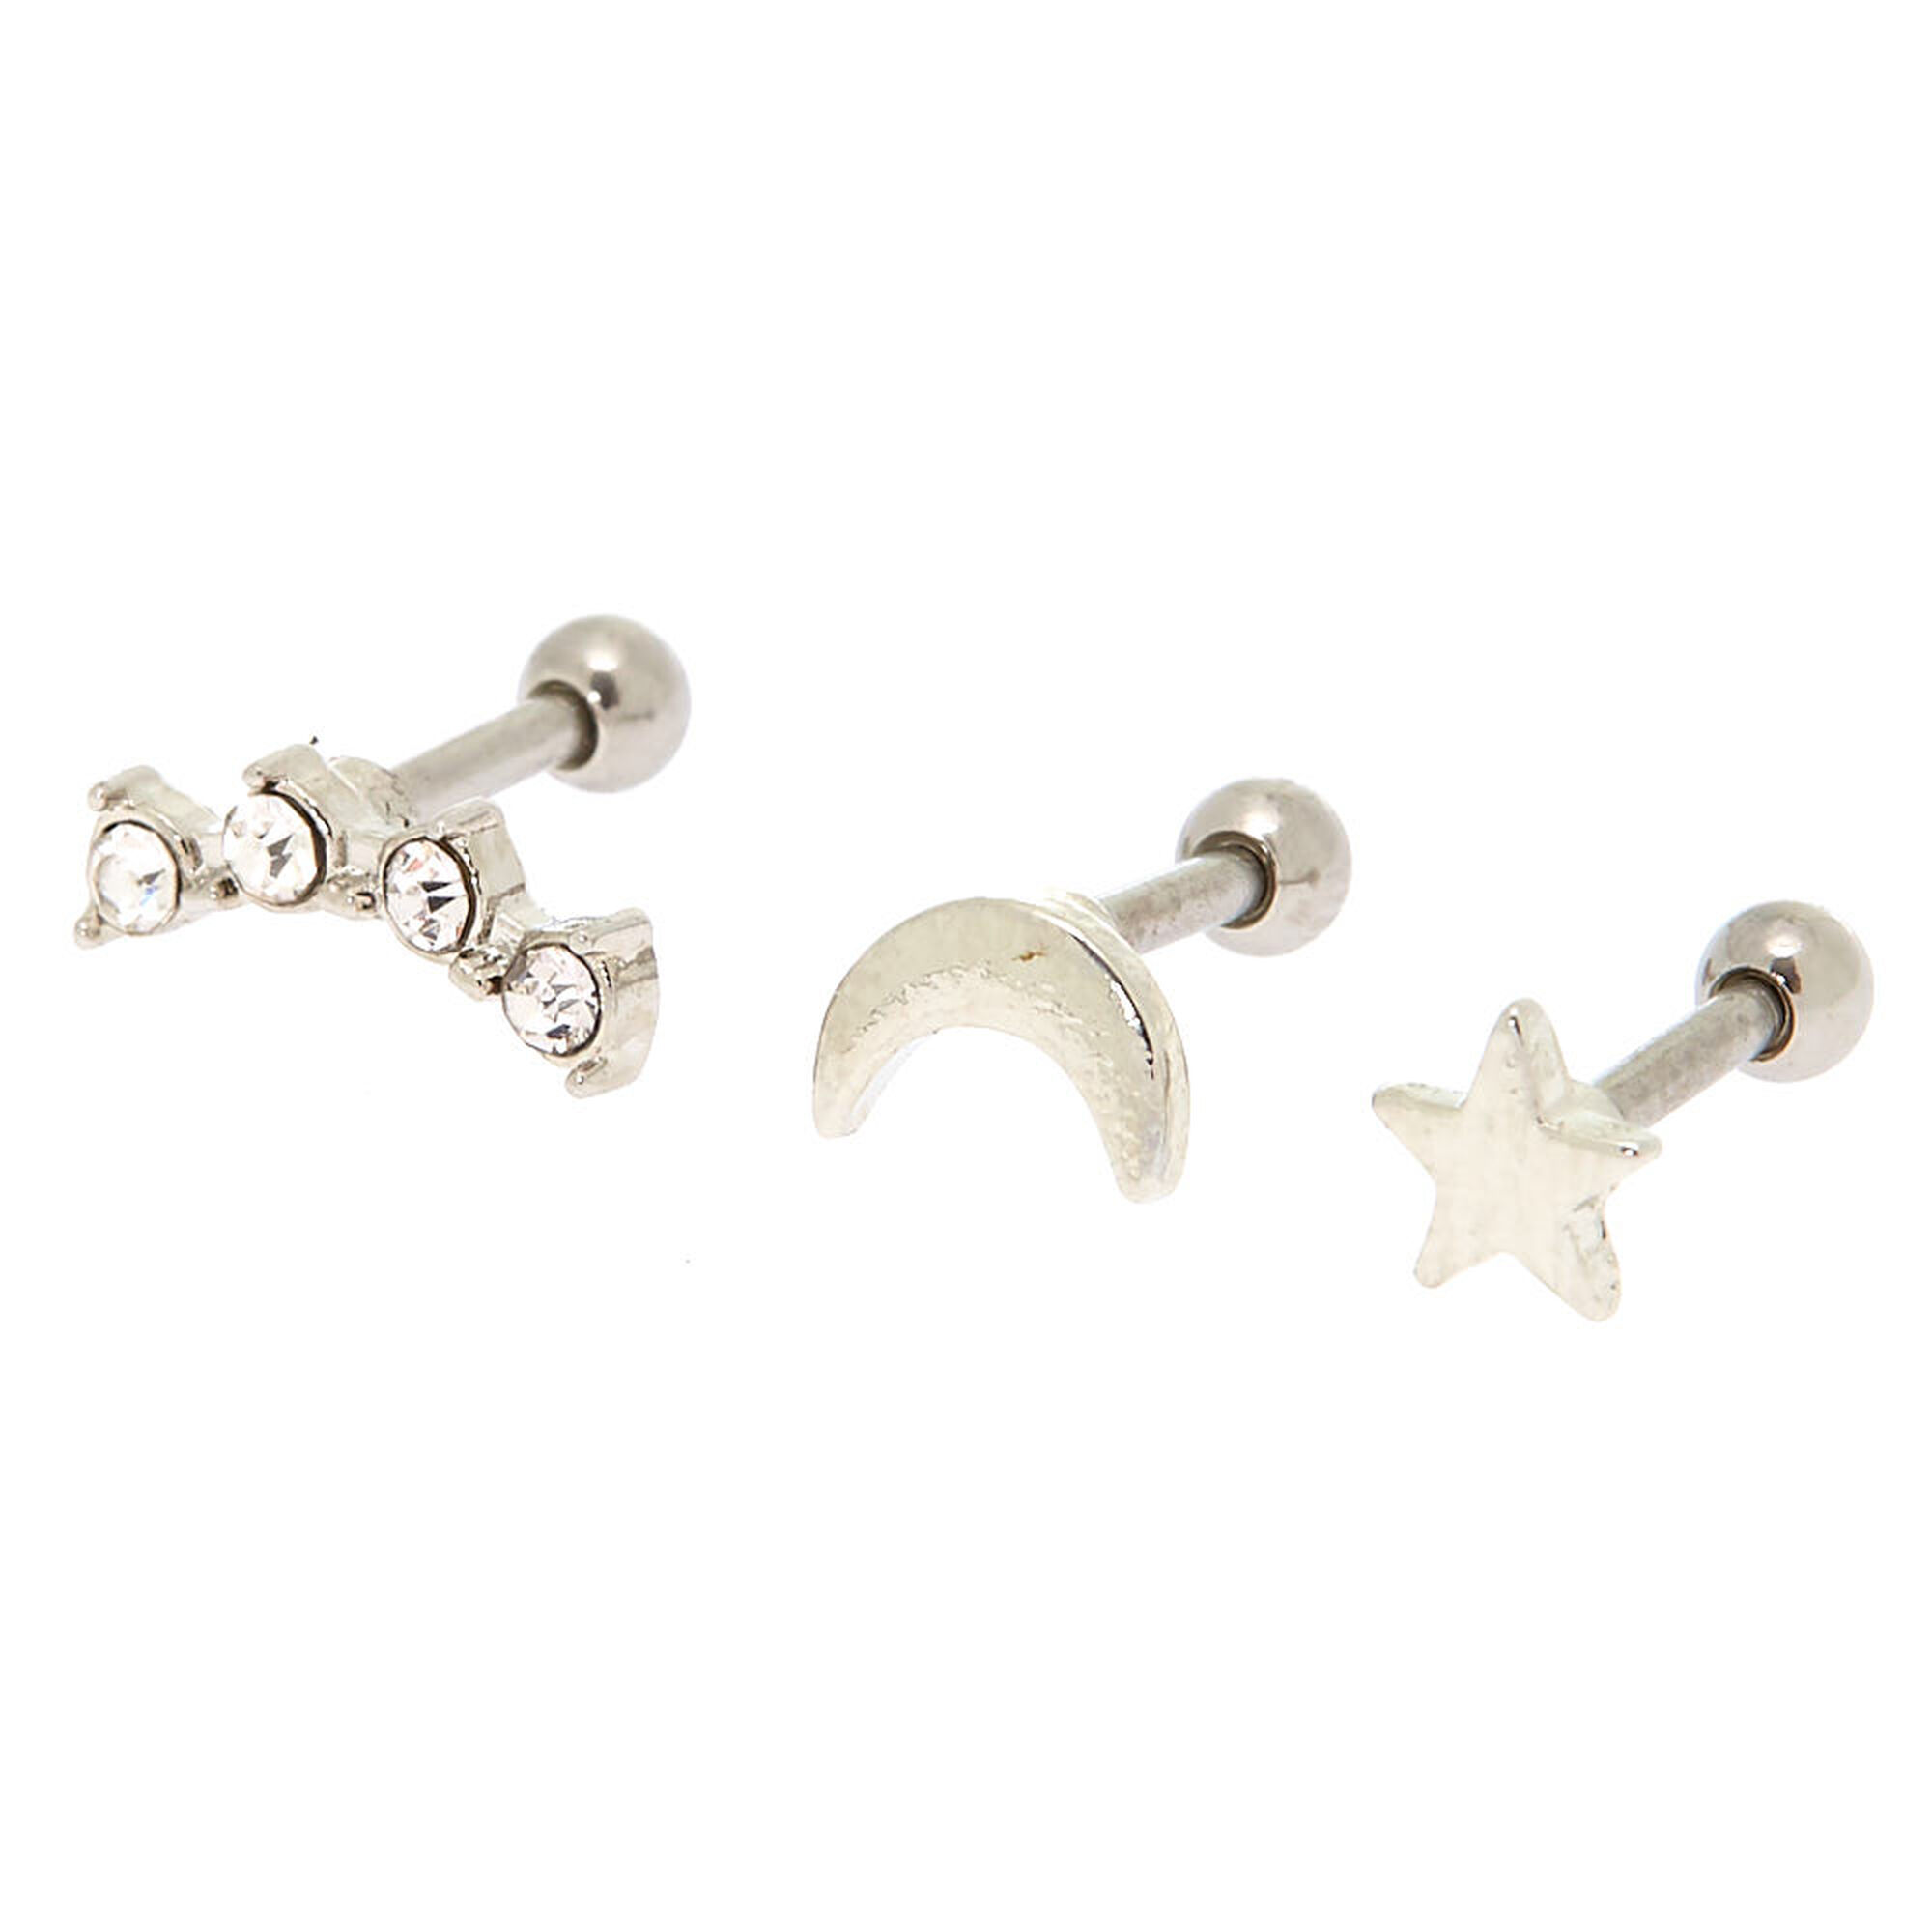 View Claires Tone 16G Celestial Cartilage Stud Earrings 3 Pack Silver information